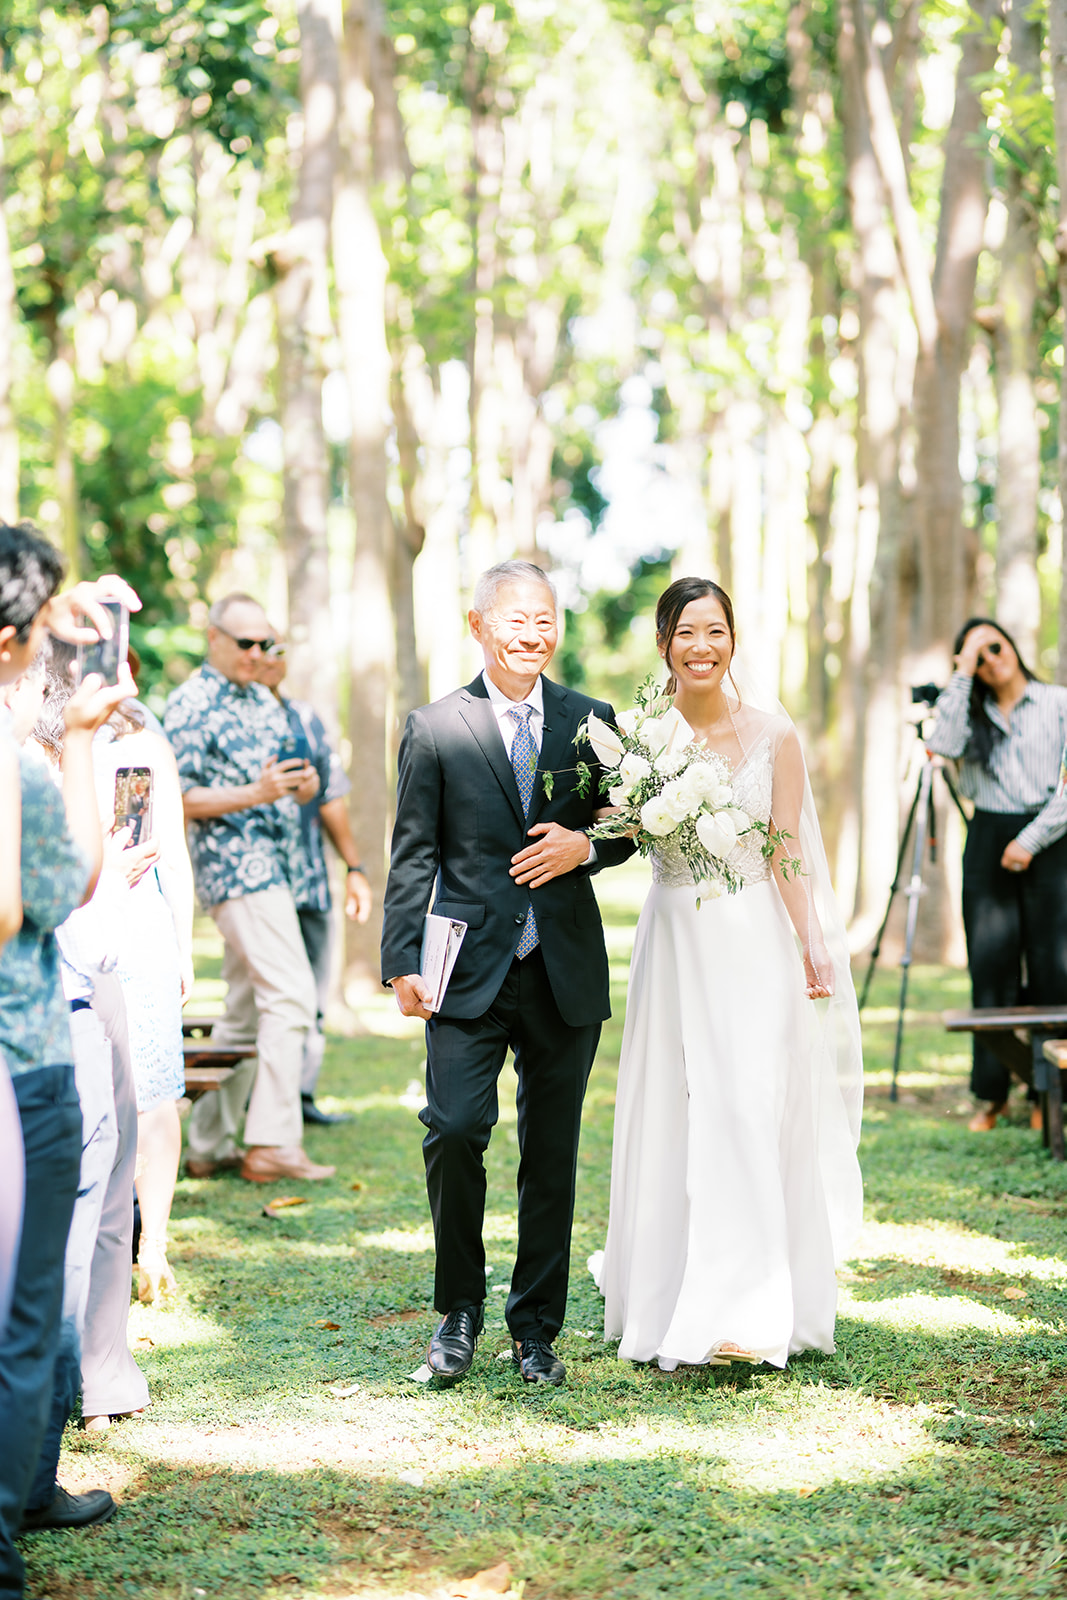 A bride walking down the aisle with her father, both smiling, as guests look on captured by Oahu Wedding Photographer